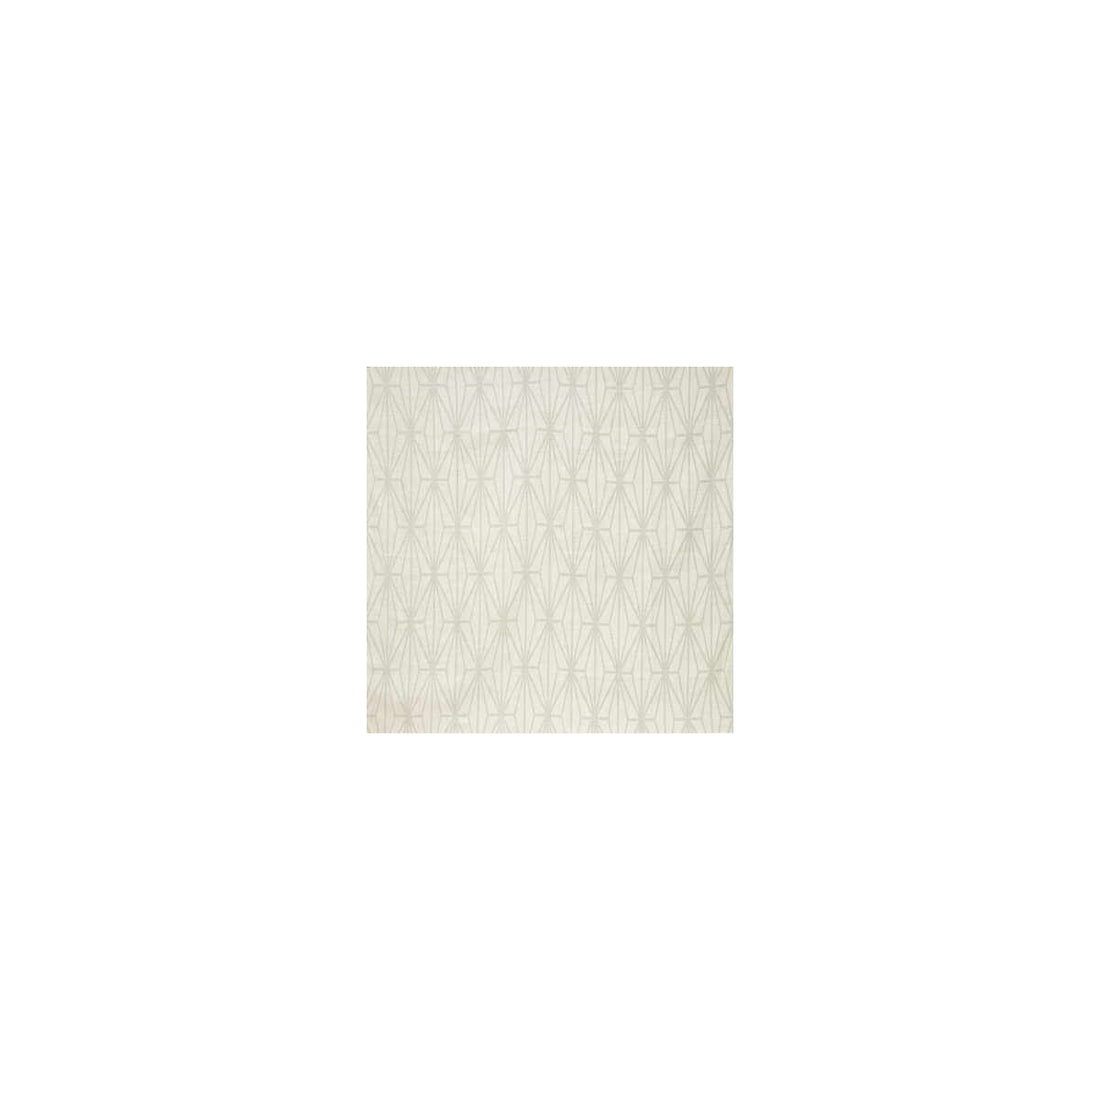 Katana fabric in cream/dove color - pattern KATANA.CREAM/DOVE.0 - by Lee Jofa Modern in the Kelly Wearstler collection